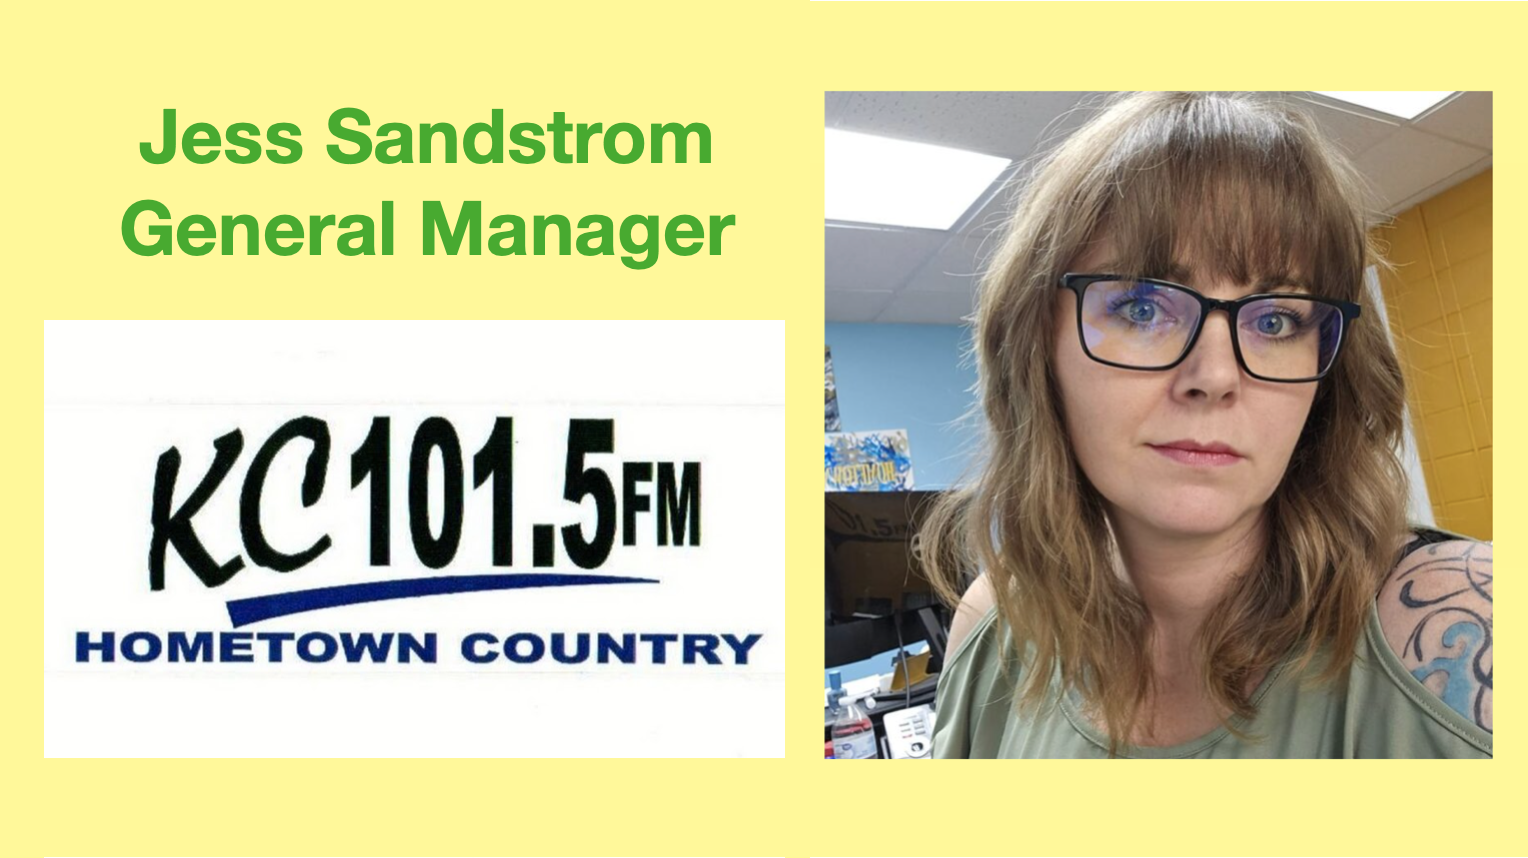 JESS SANDSTROM OF KC101 NAMED ONE OF THE BEST MANAGERS IN RADIO